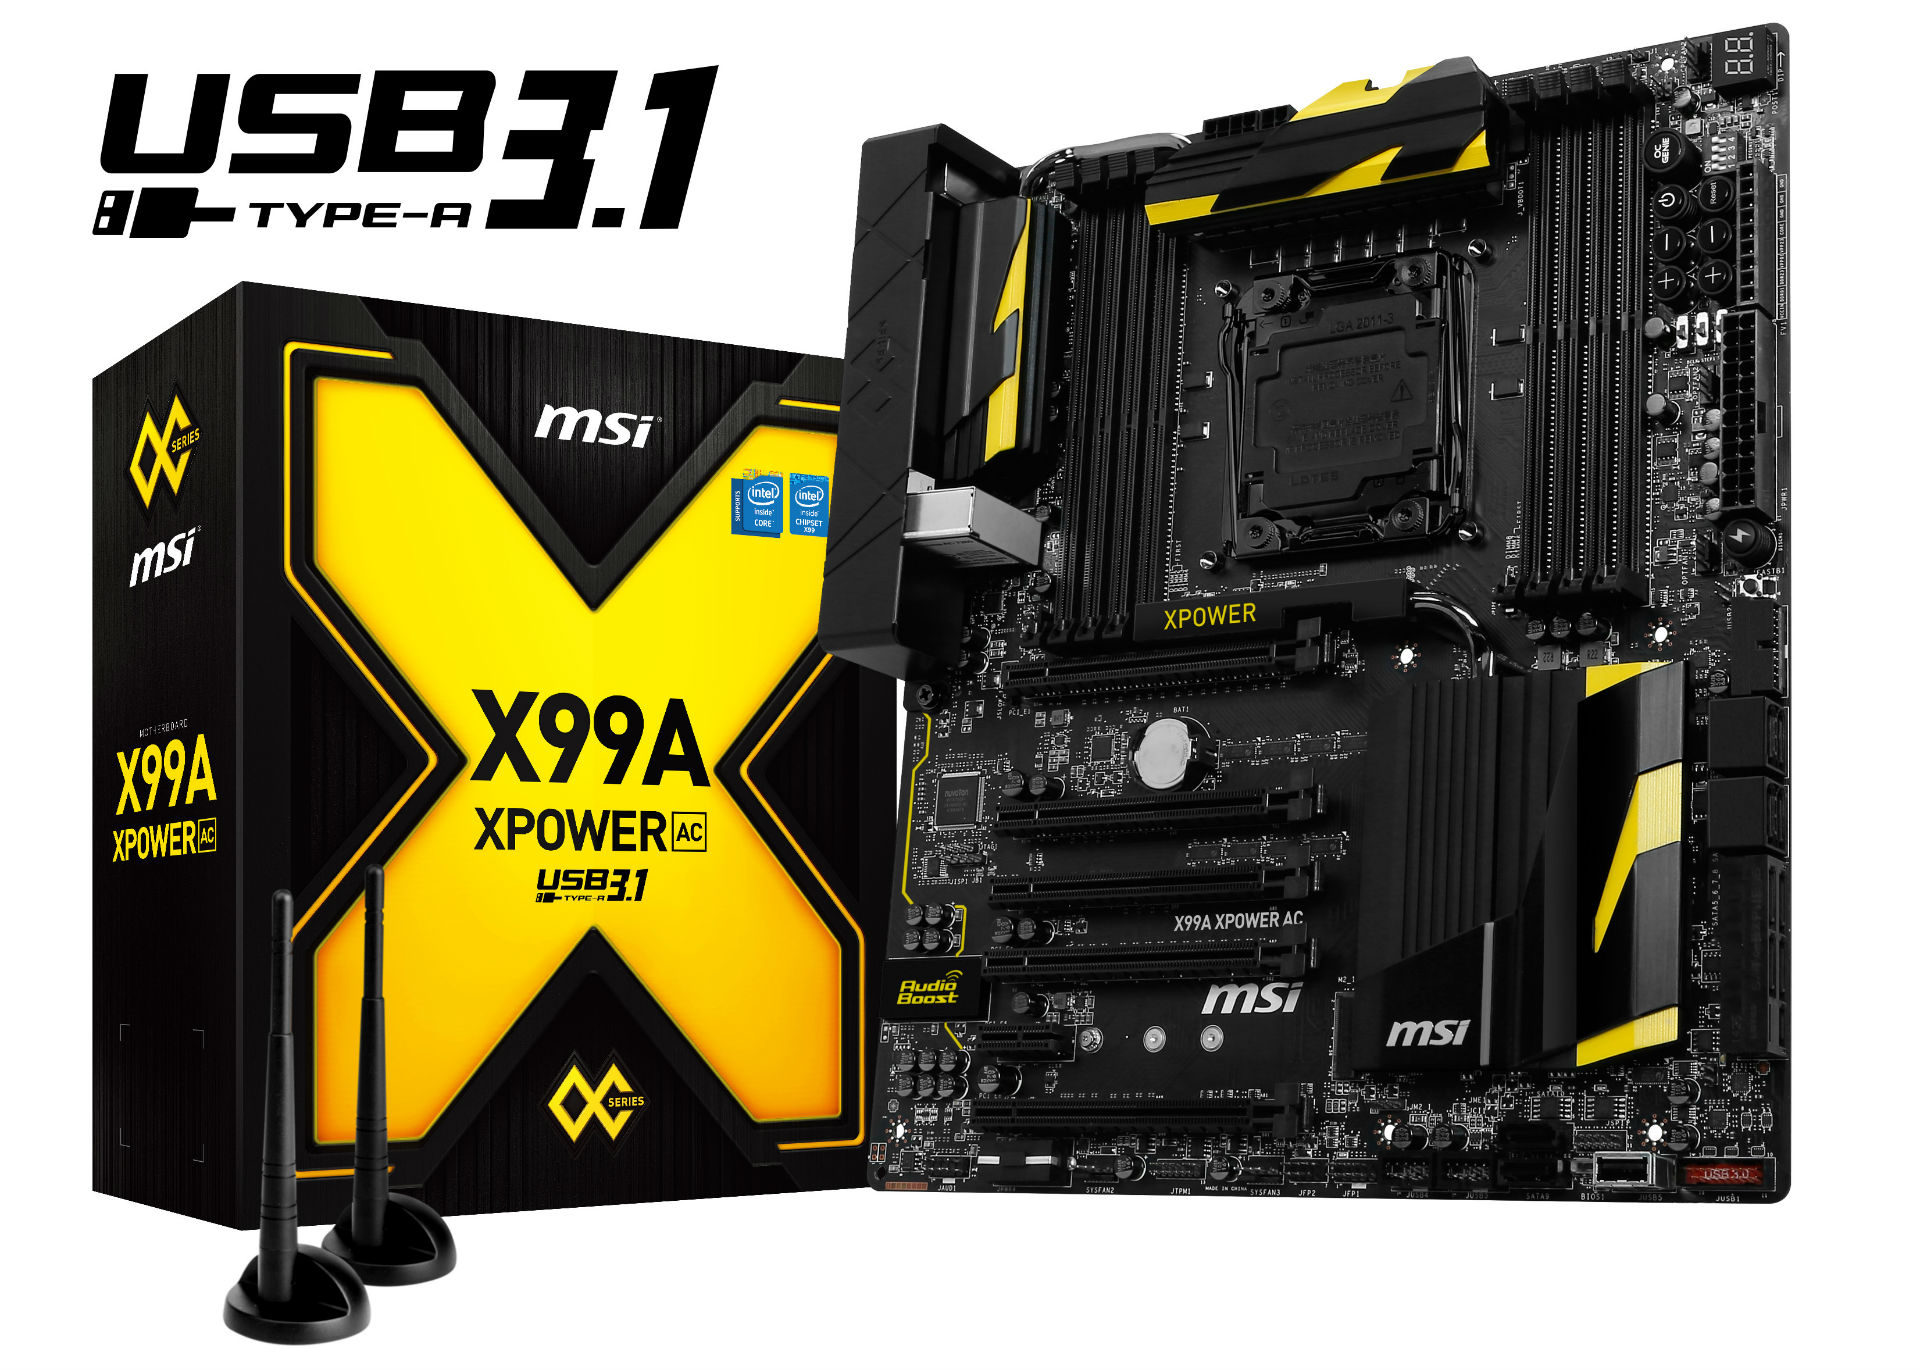 msi-x99a_xpower_ac-product_pictures-boxshot-11